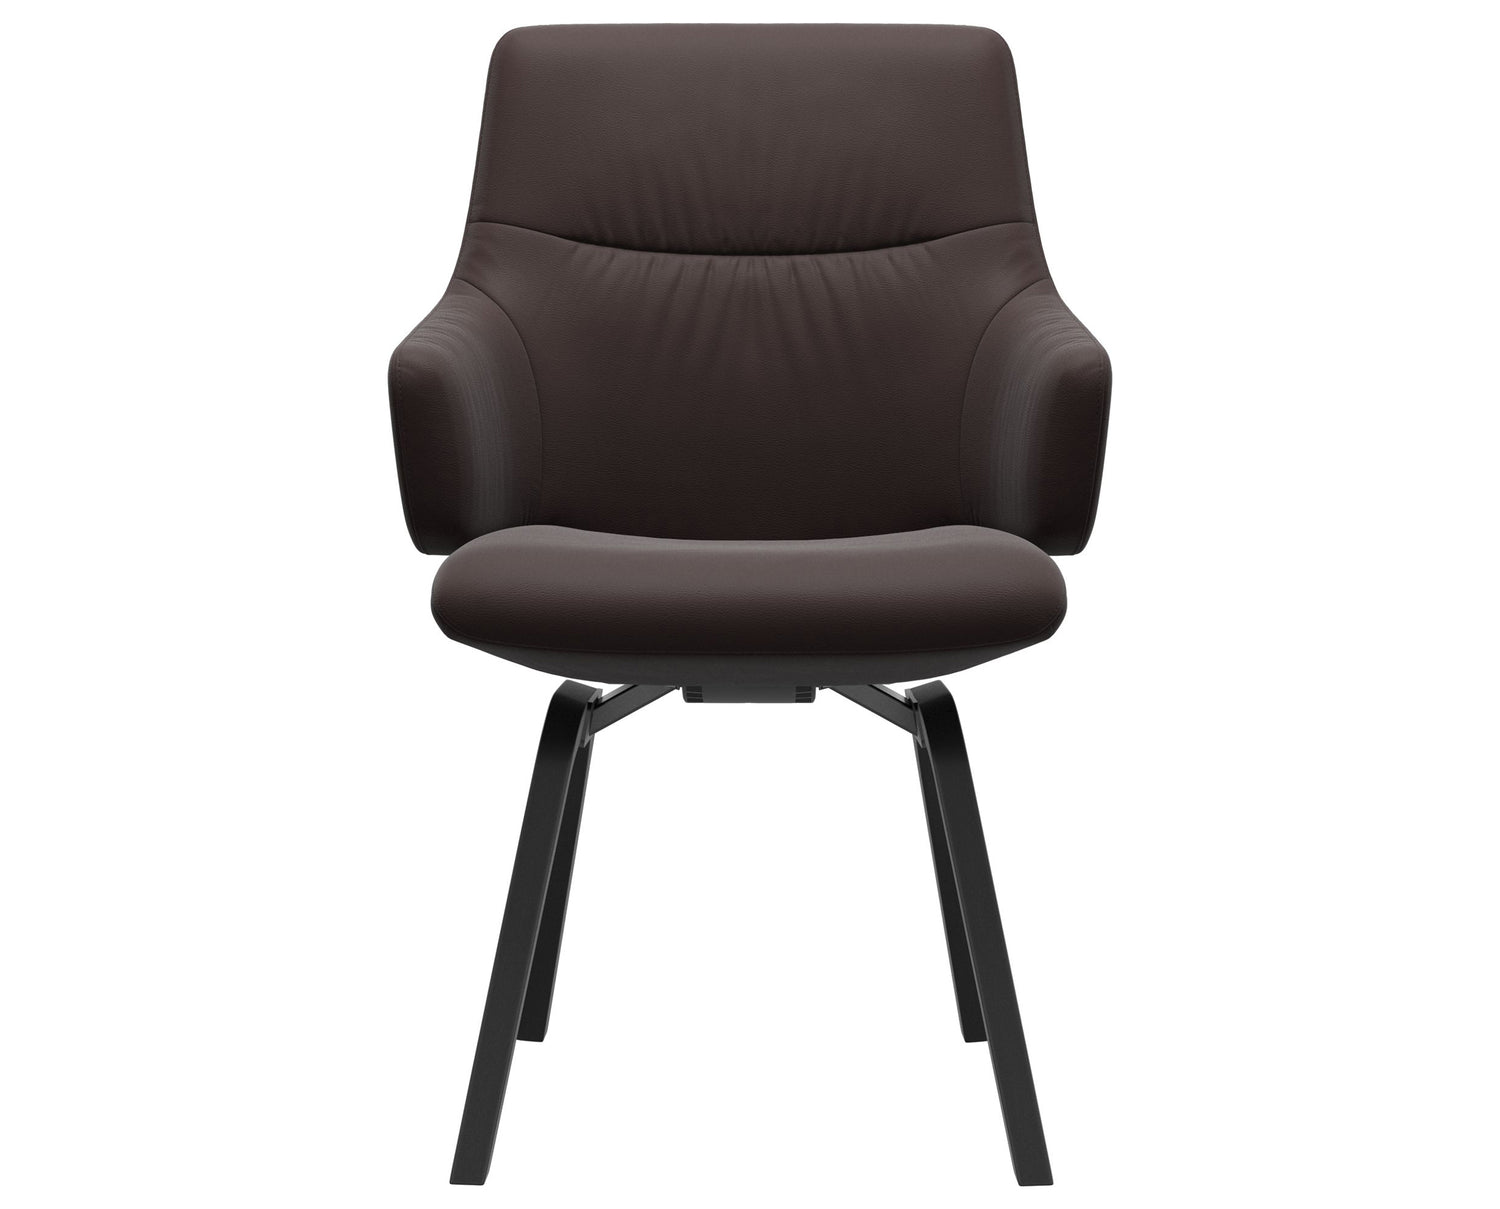 Paloma Leather Chocolate & Black Base | Stressless Mint Low Back D200 Dining Chair w/Arms | Valley Ridge Furniture